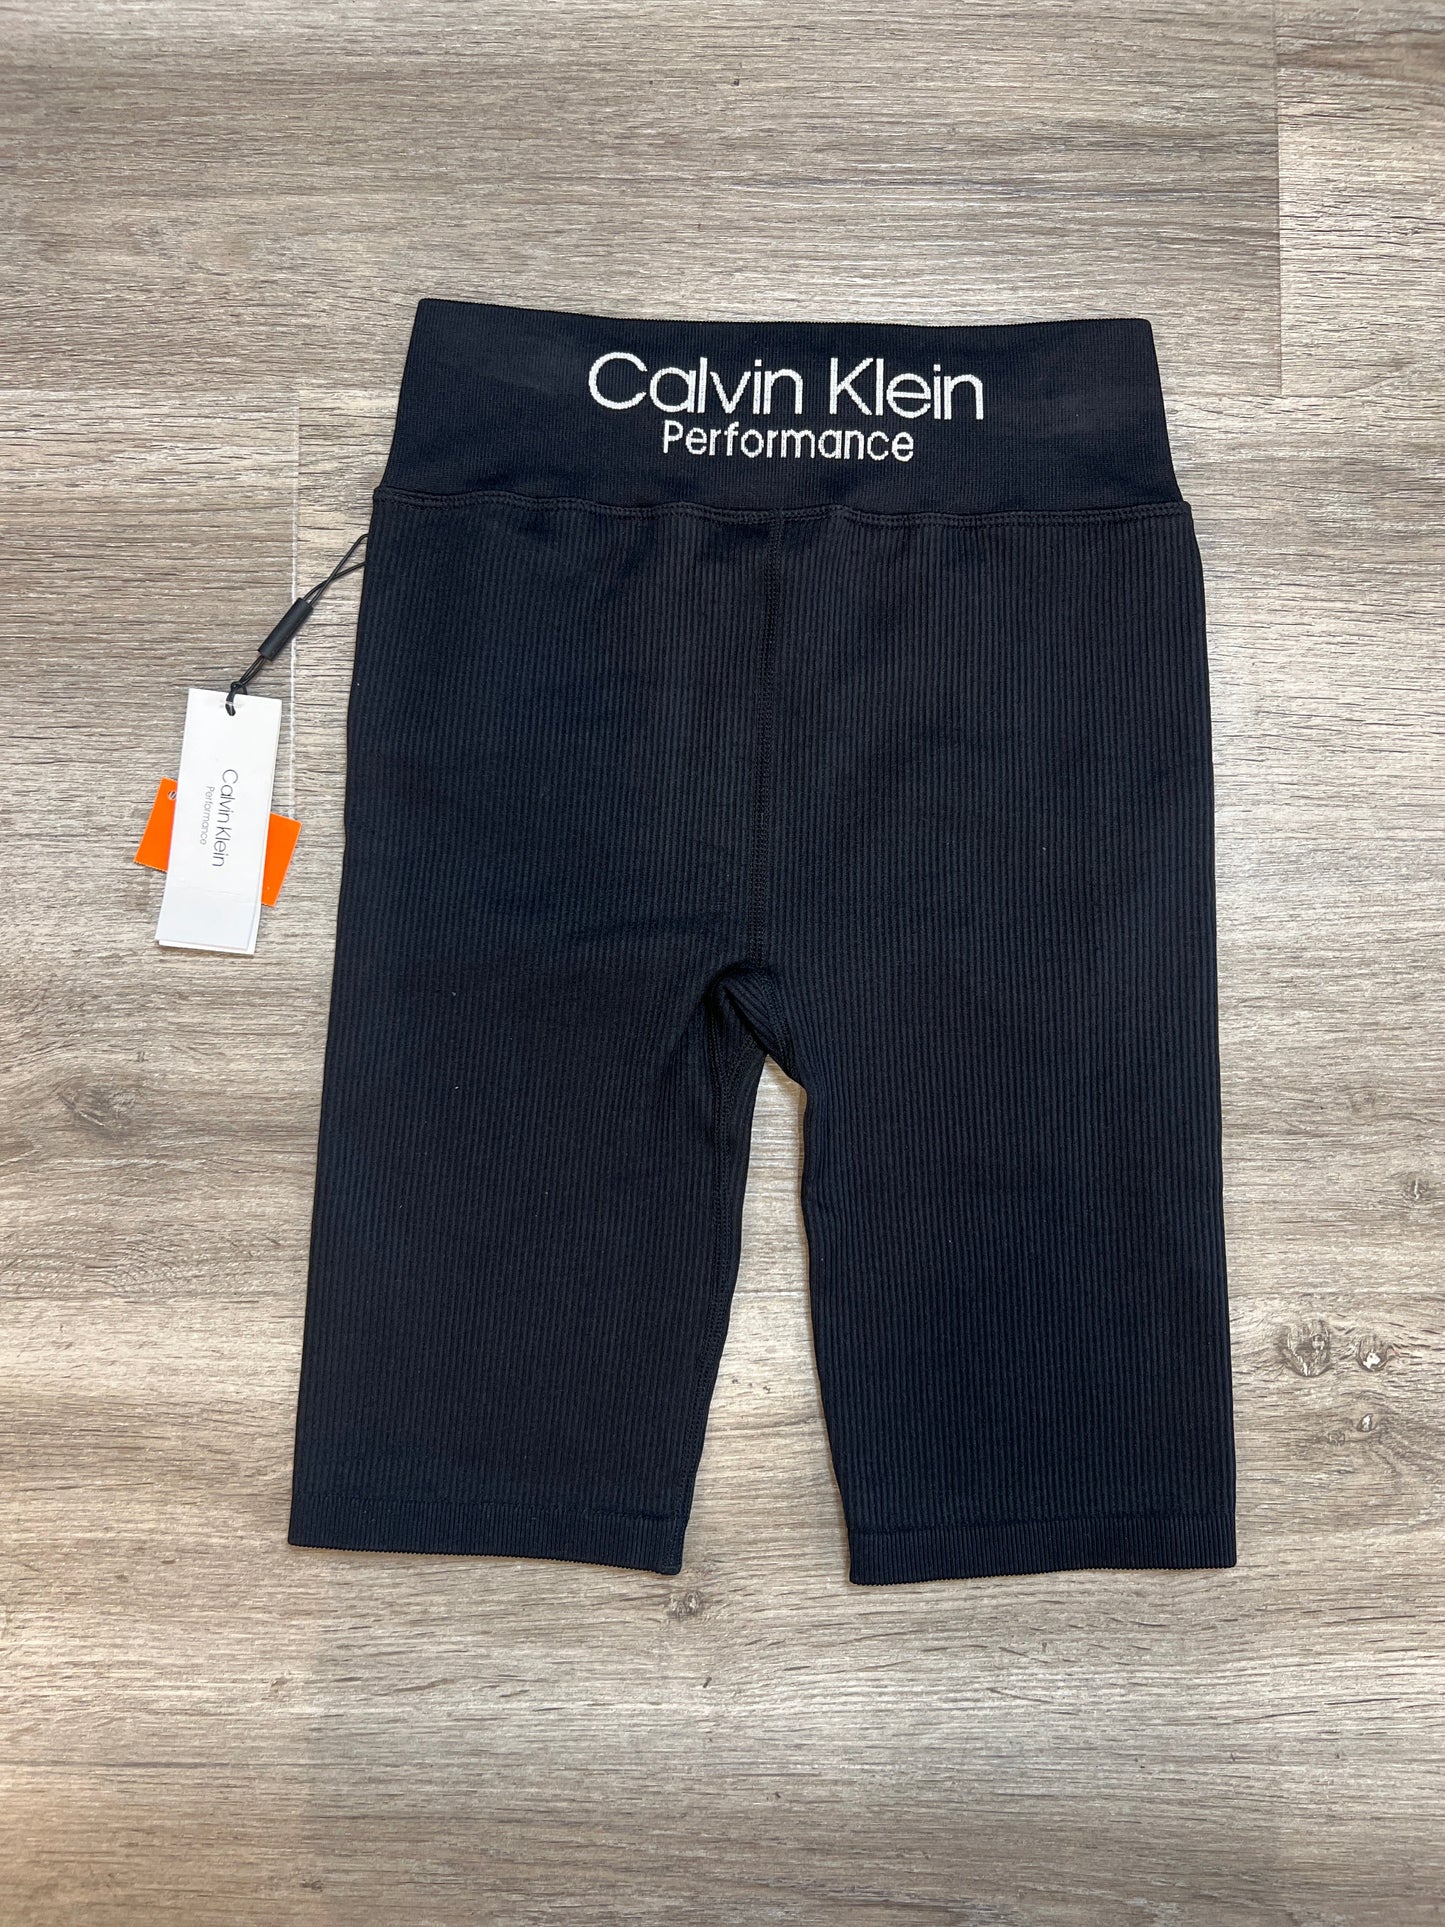 Athletic Shorts By Calvin Klein Performance  Size: S